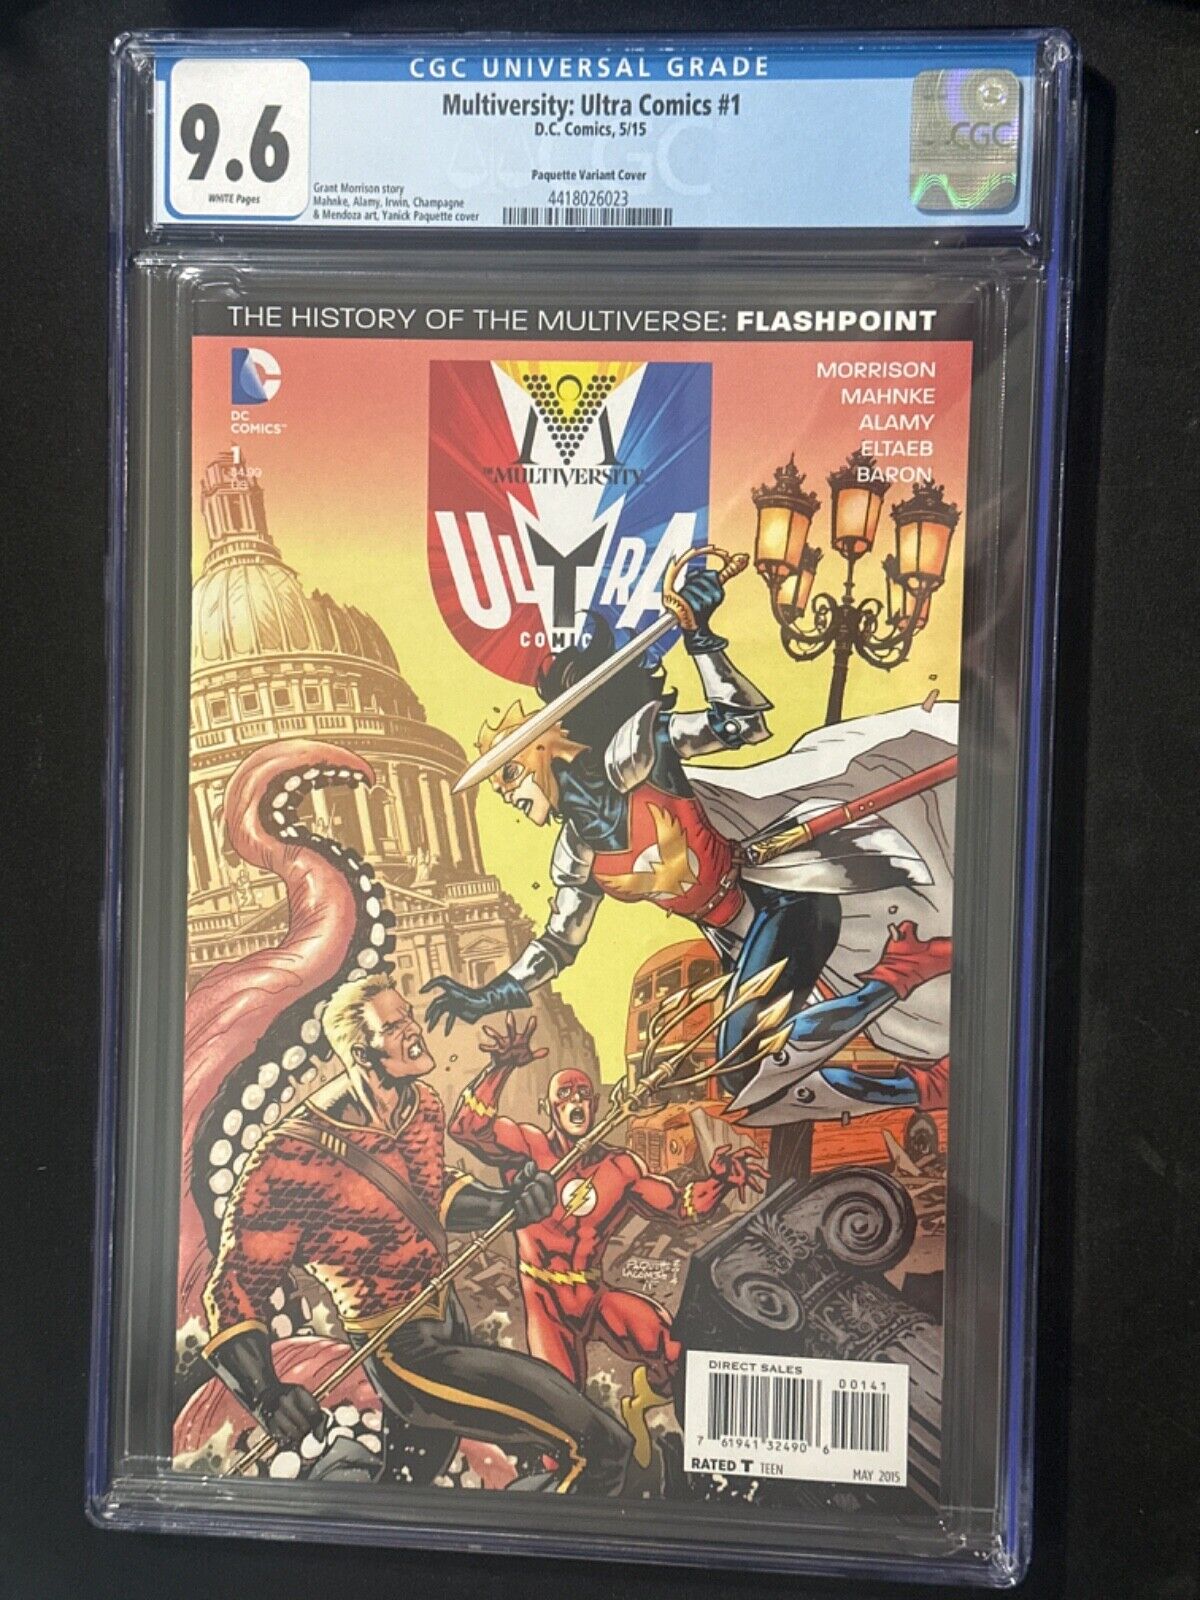 MULTIVERSITY: ULTRA COMICS #1 - CGC 9.6 Paquette - VARIANT COVER 1:50